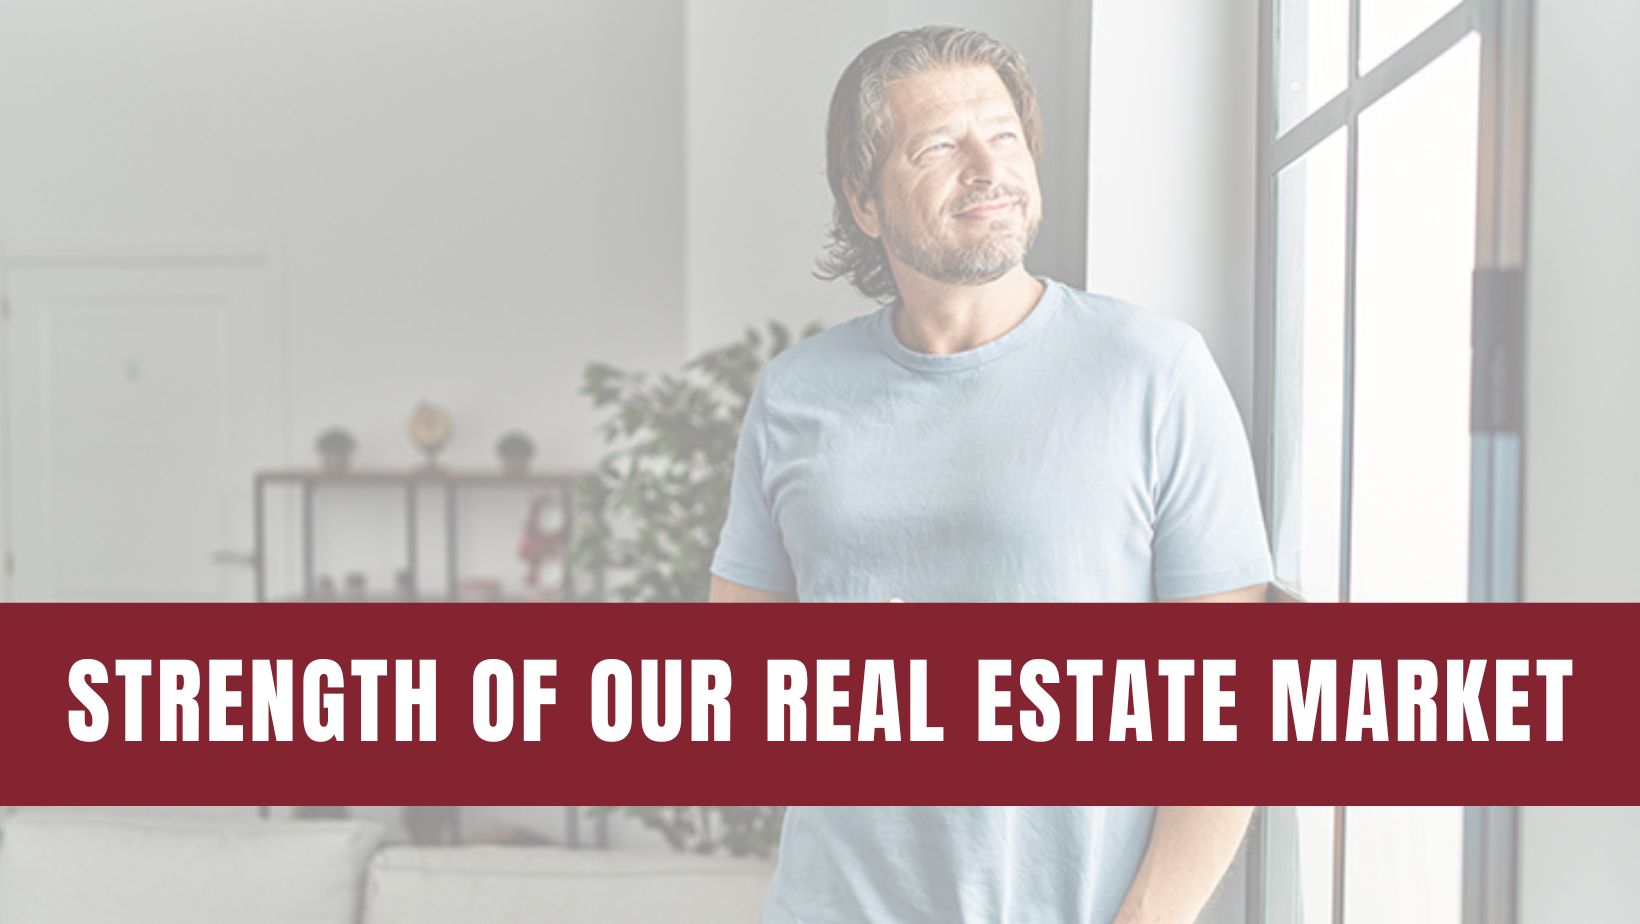 This Real Estate Market Is the Strongest of Our Lifetime